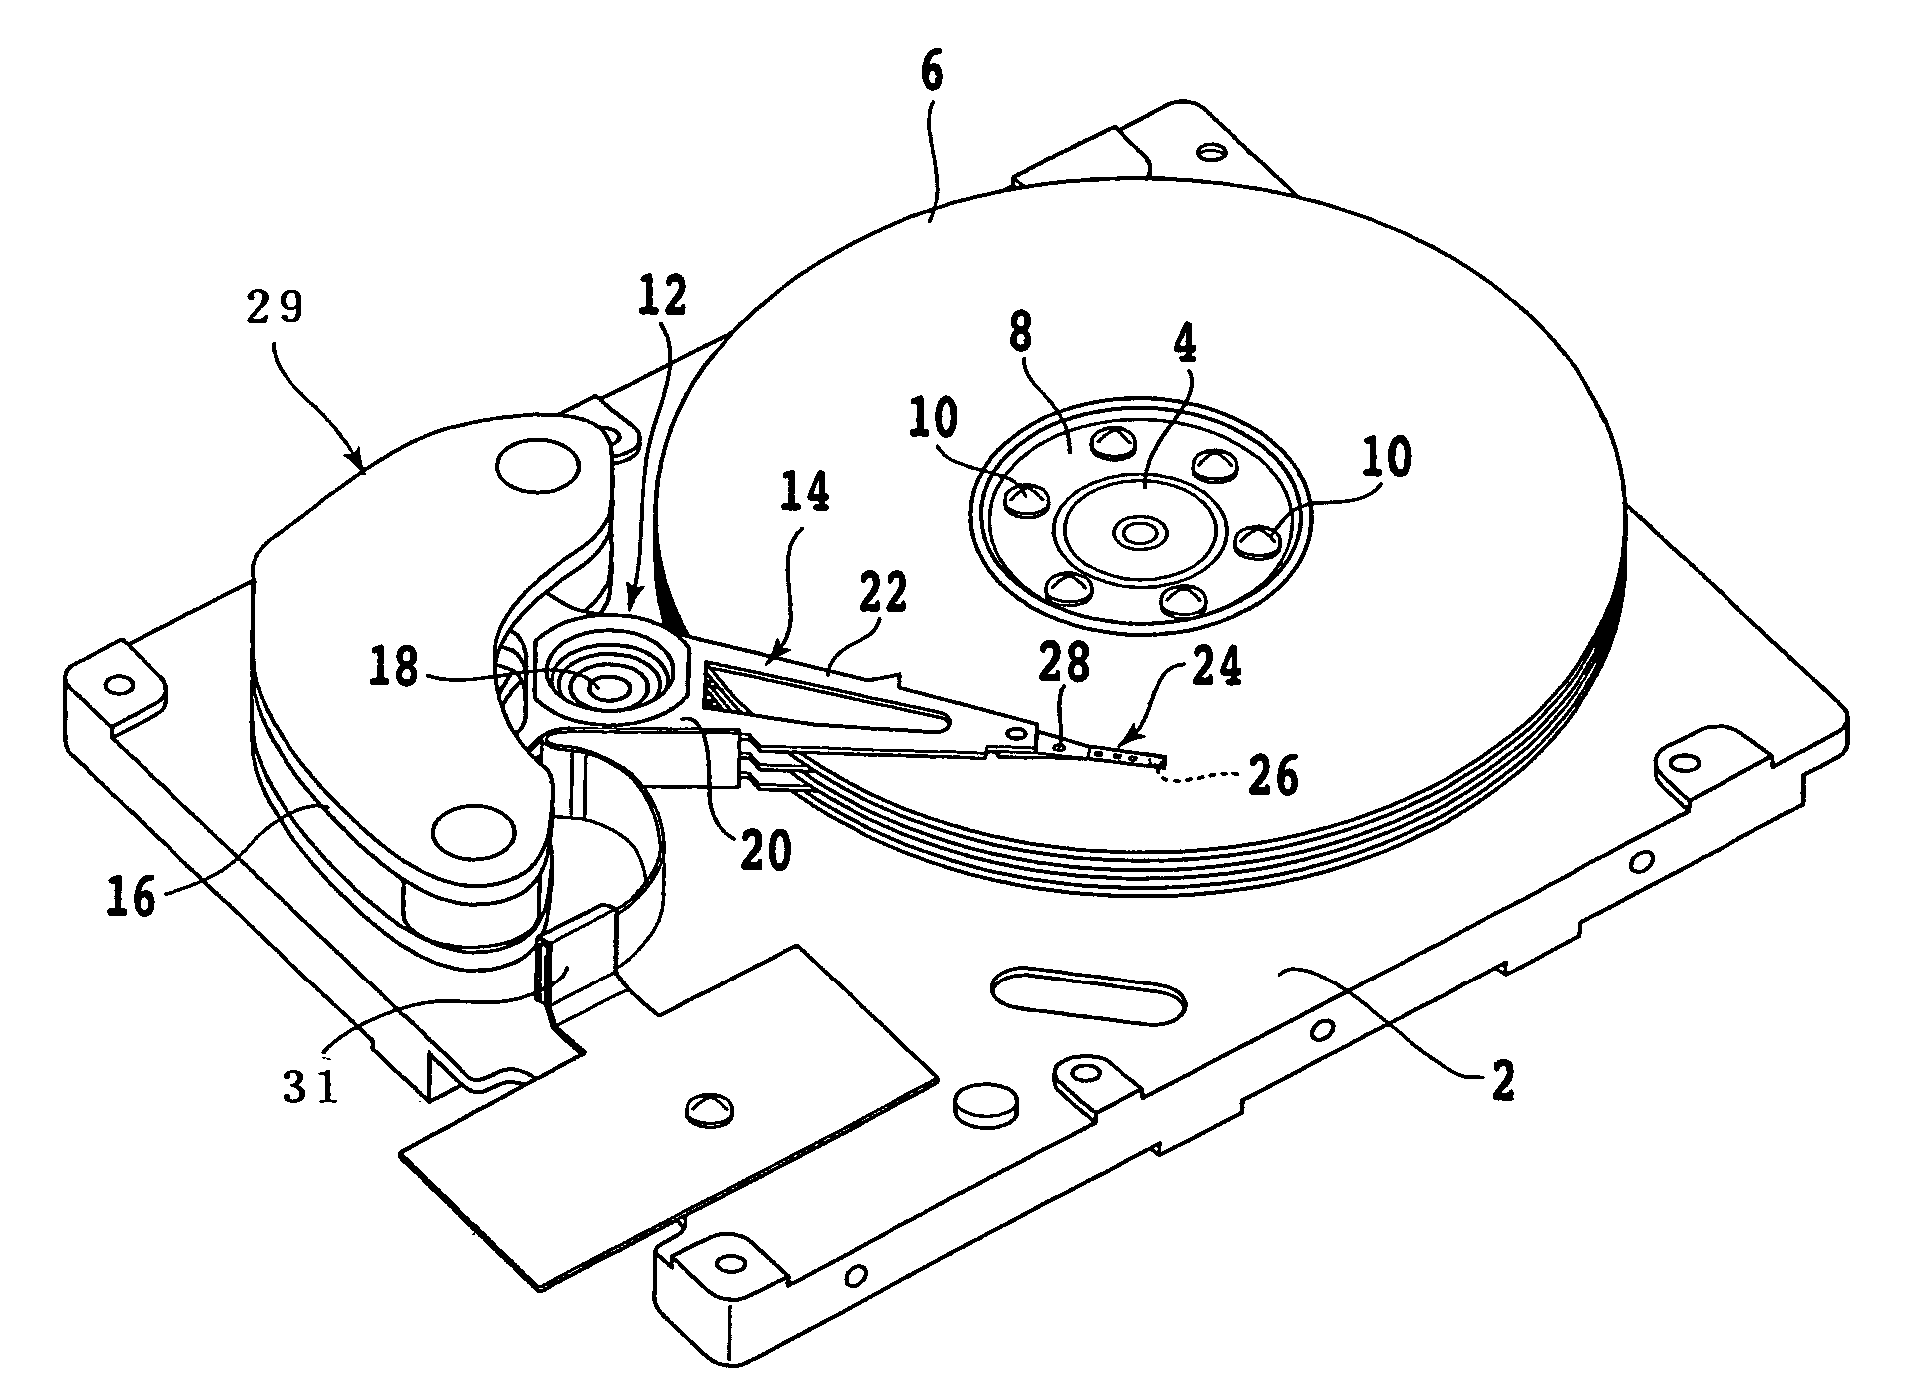 Piezoelectric actuator and head assembly using the piezoelectric actuator